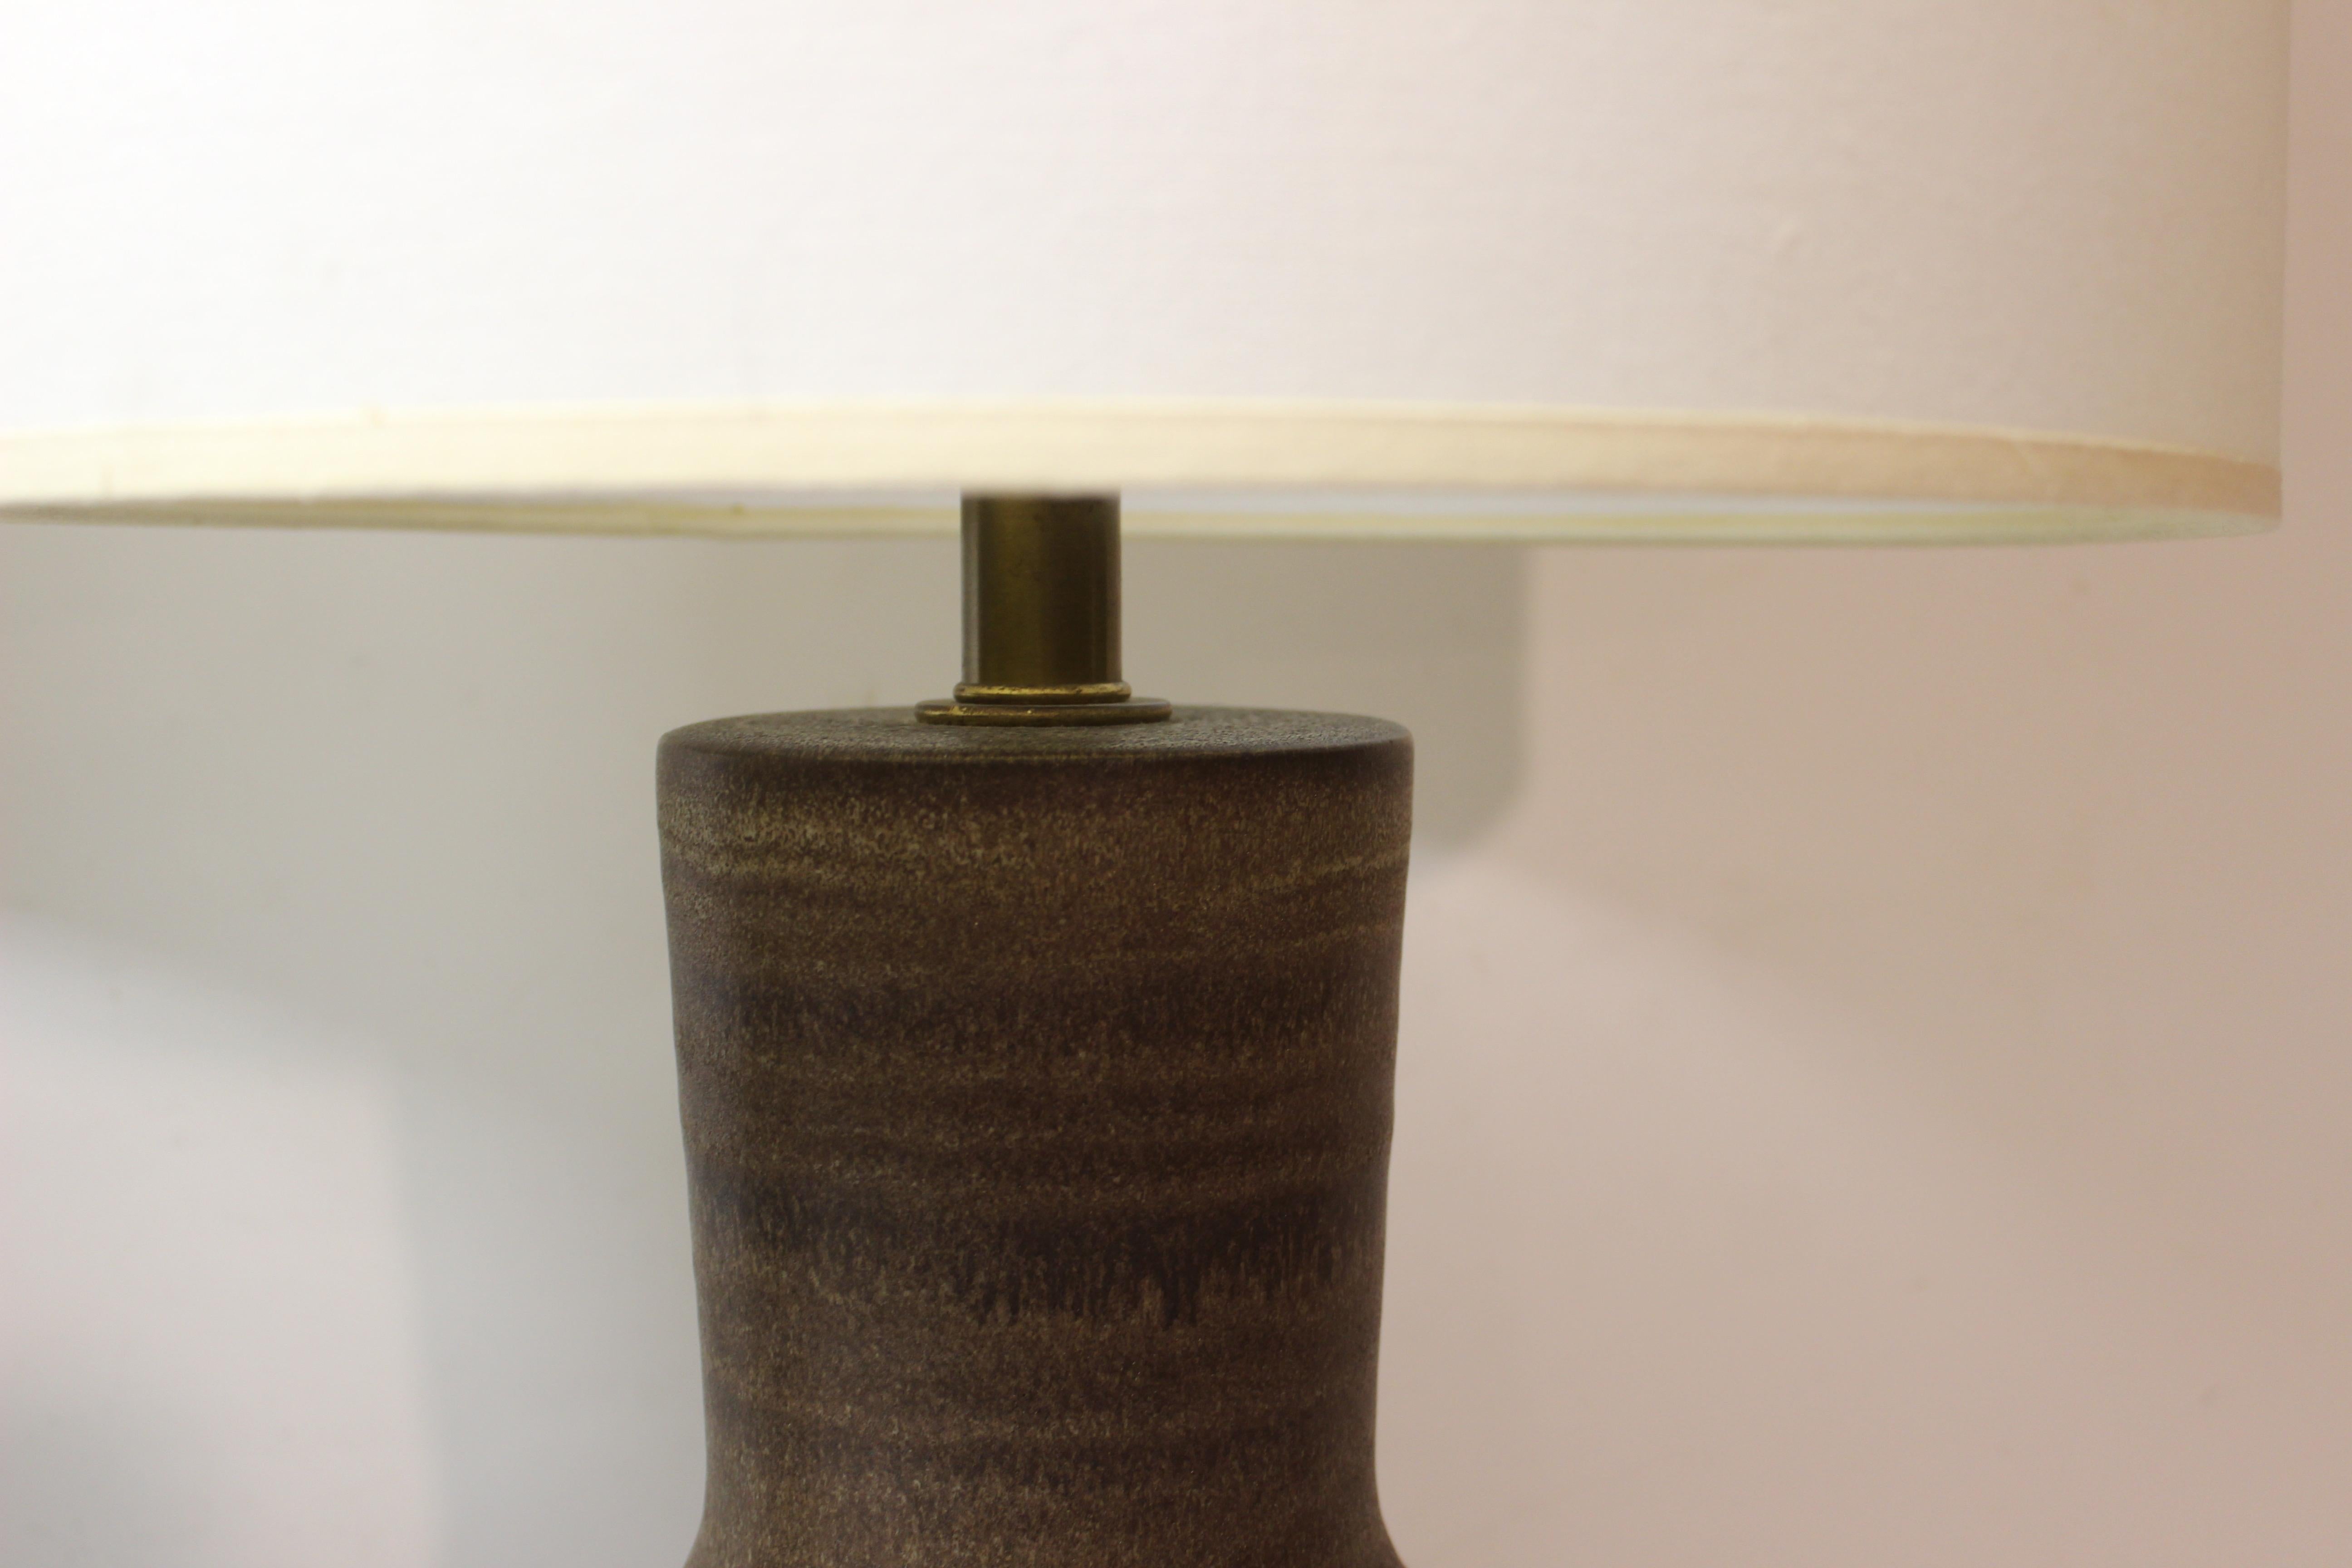 Pair of tall brown ceramic table lamps by Design Technics.

The ceramic base of the lamp measures 19.25